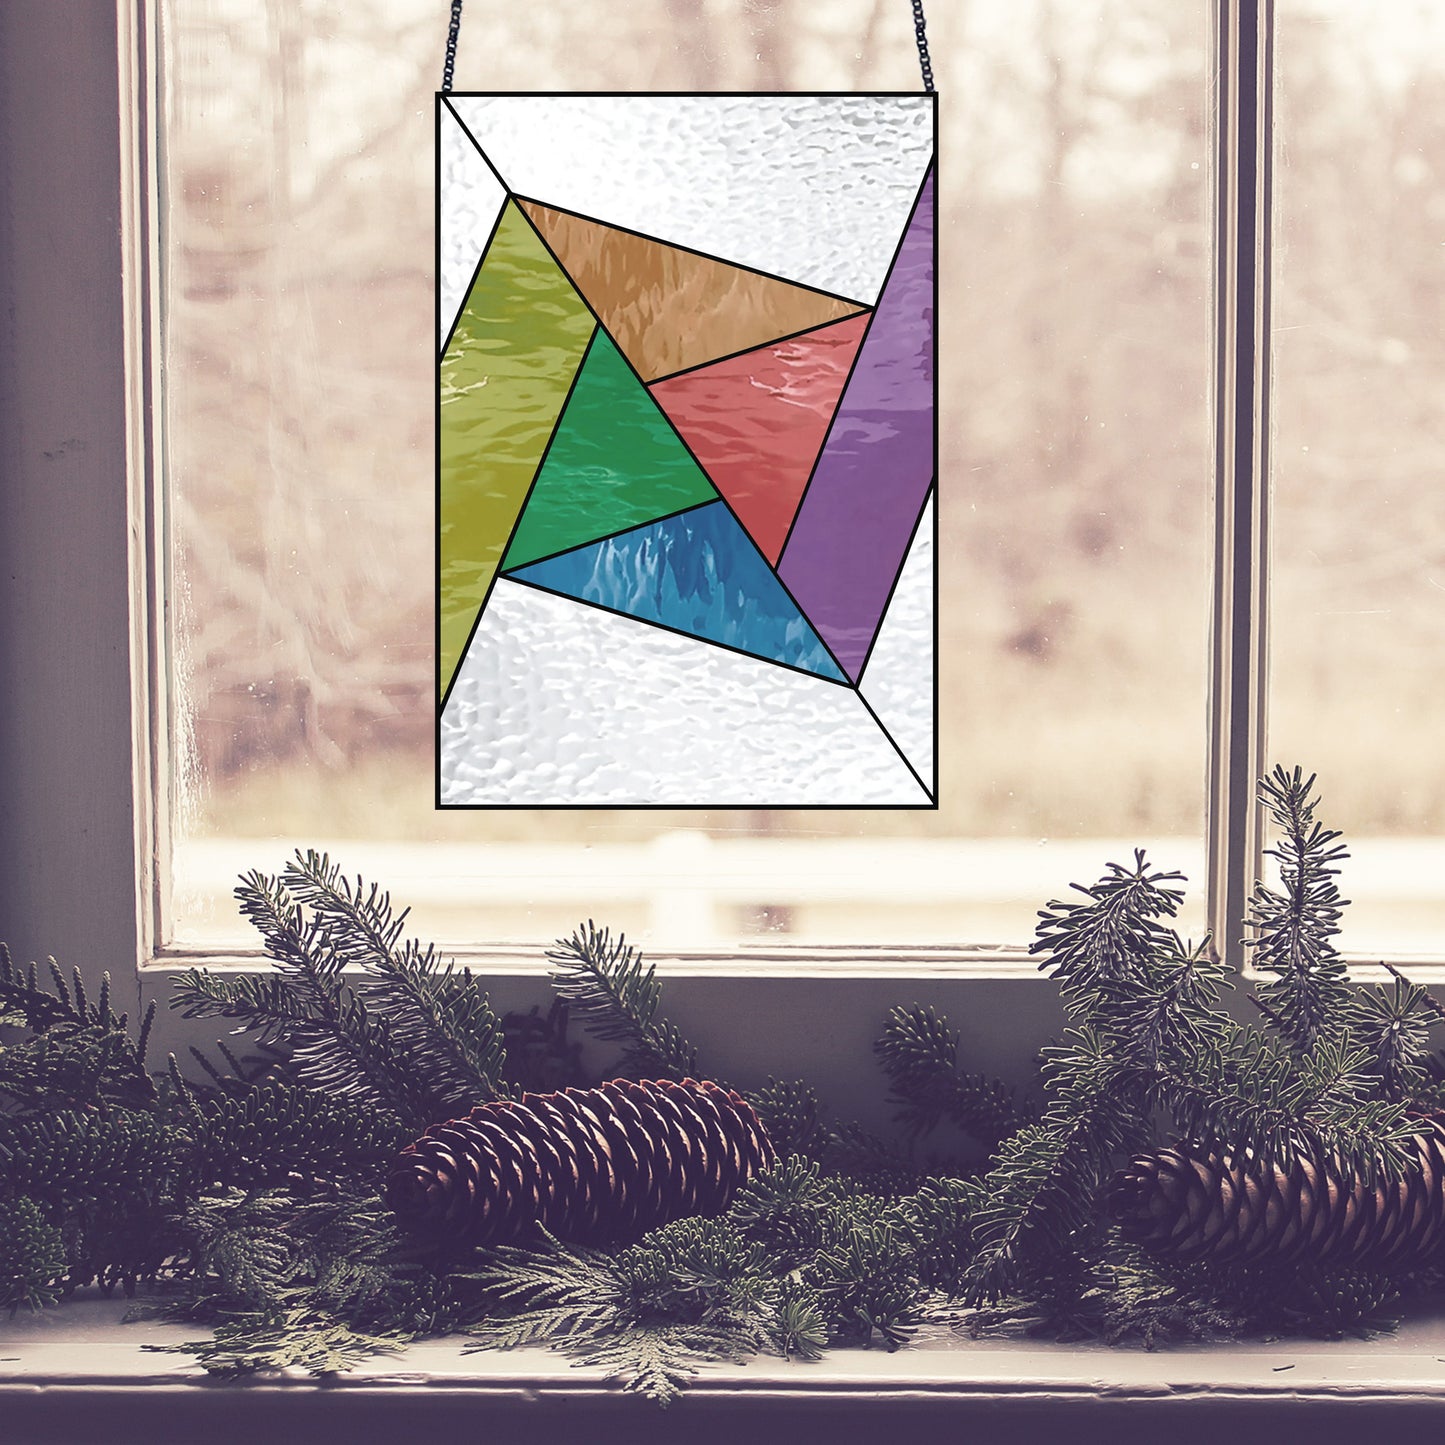 Beginner stained glass pattern of an abstract rainbow pinwheel, instant PDF download, shown hanging in a window